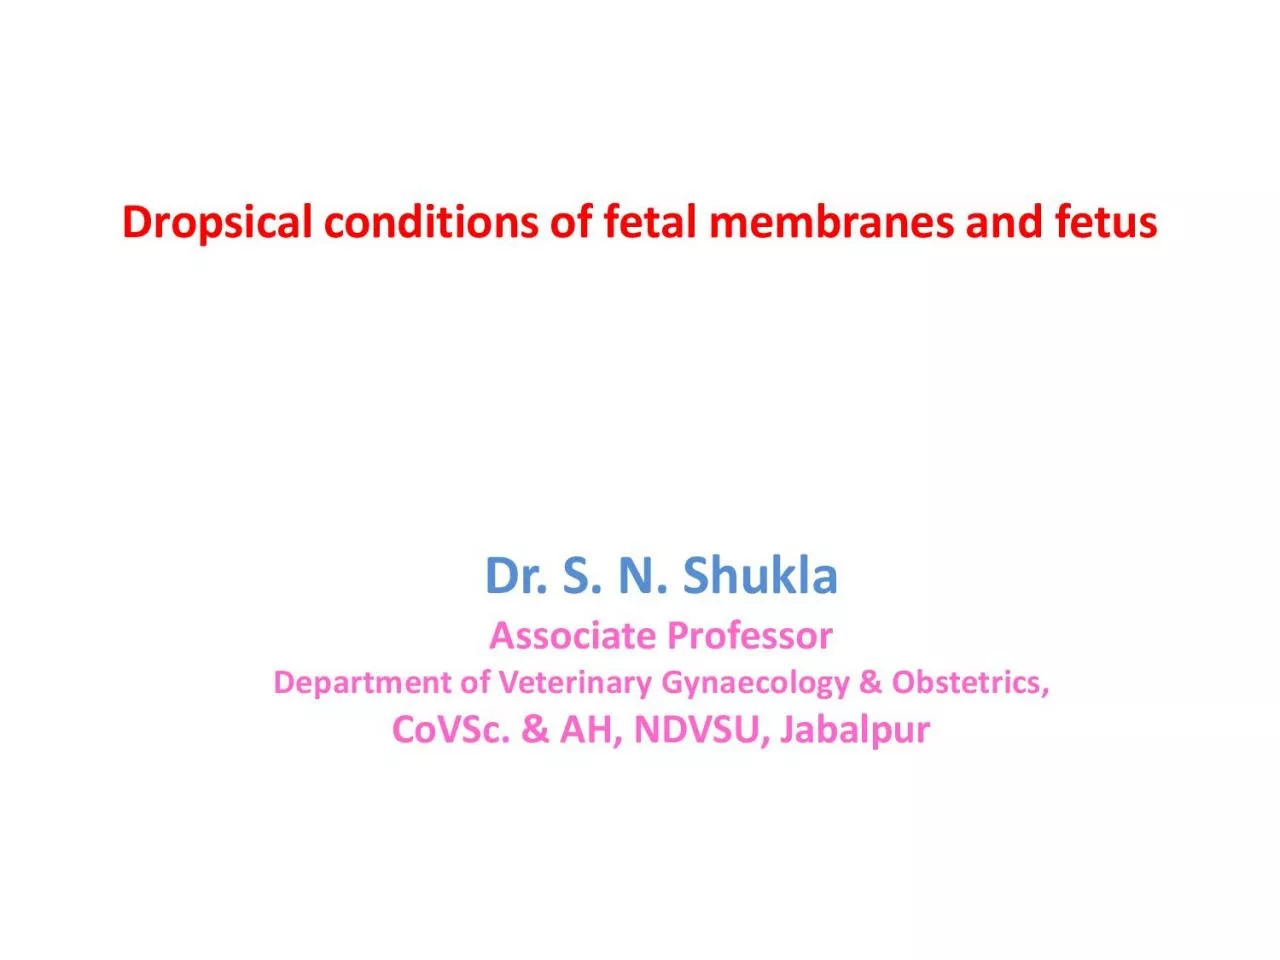 Dropsical conditions of fetal membranes and fetus